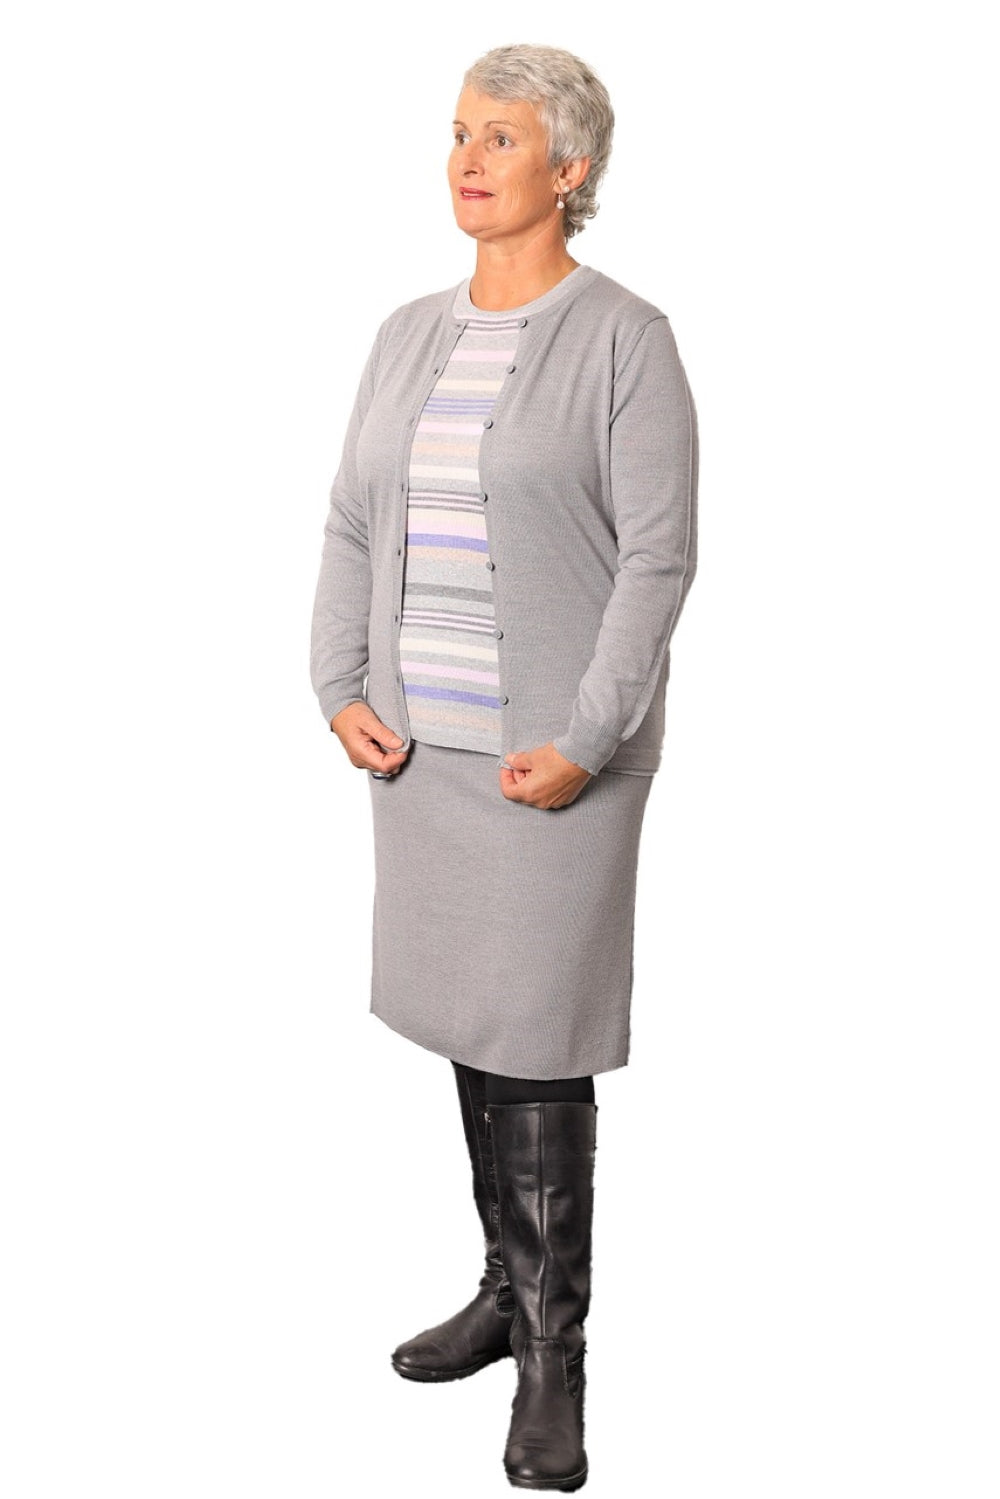 Made in Italy - Merino Plain Skirt SIlver with Silver Classic Button to Neck Cardigan